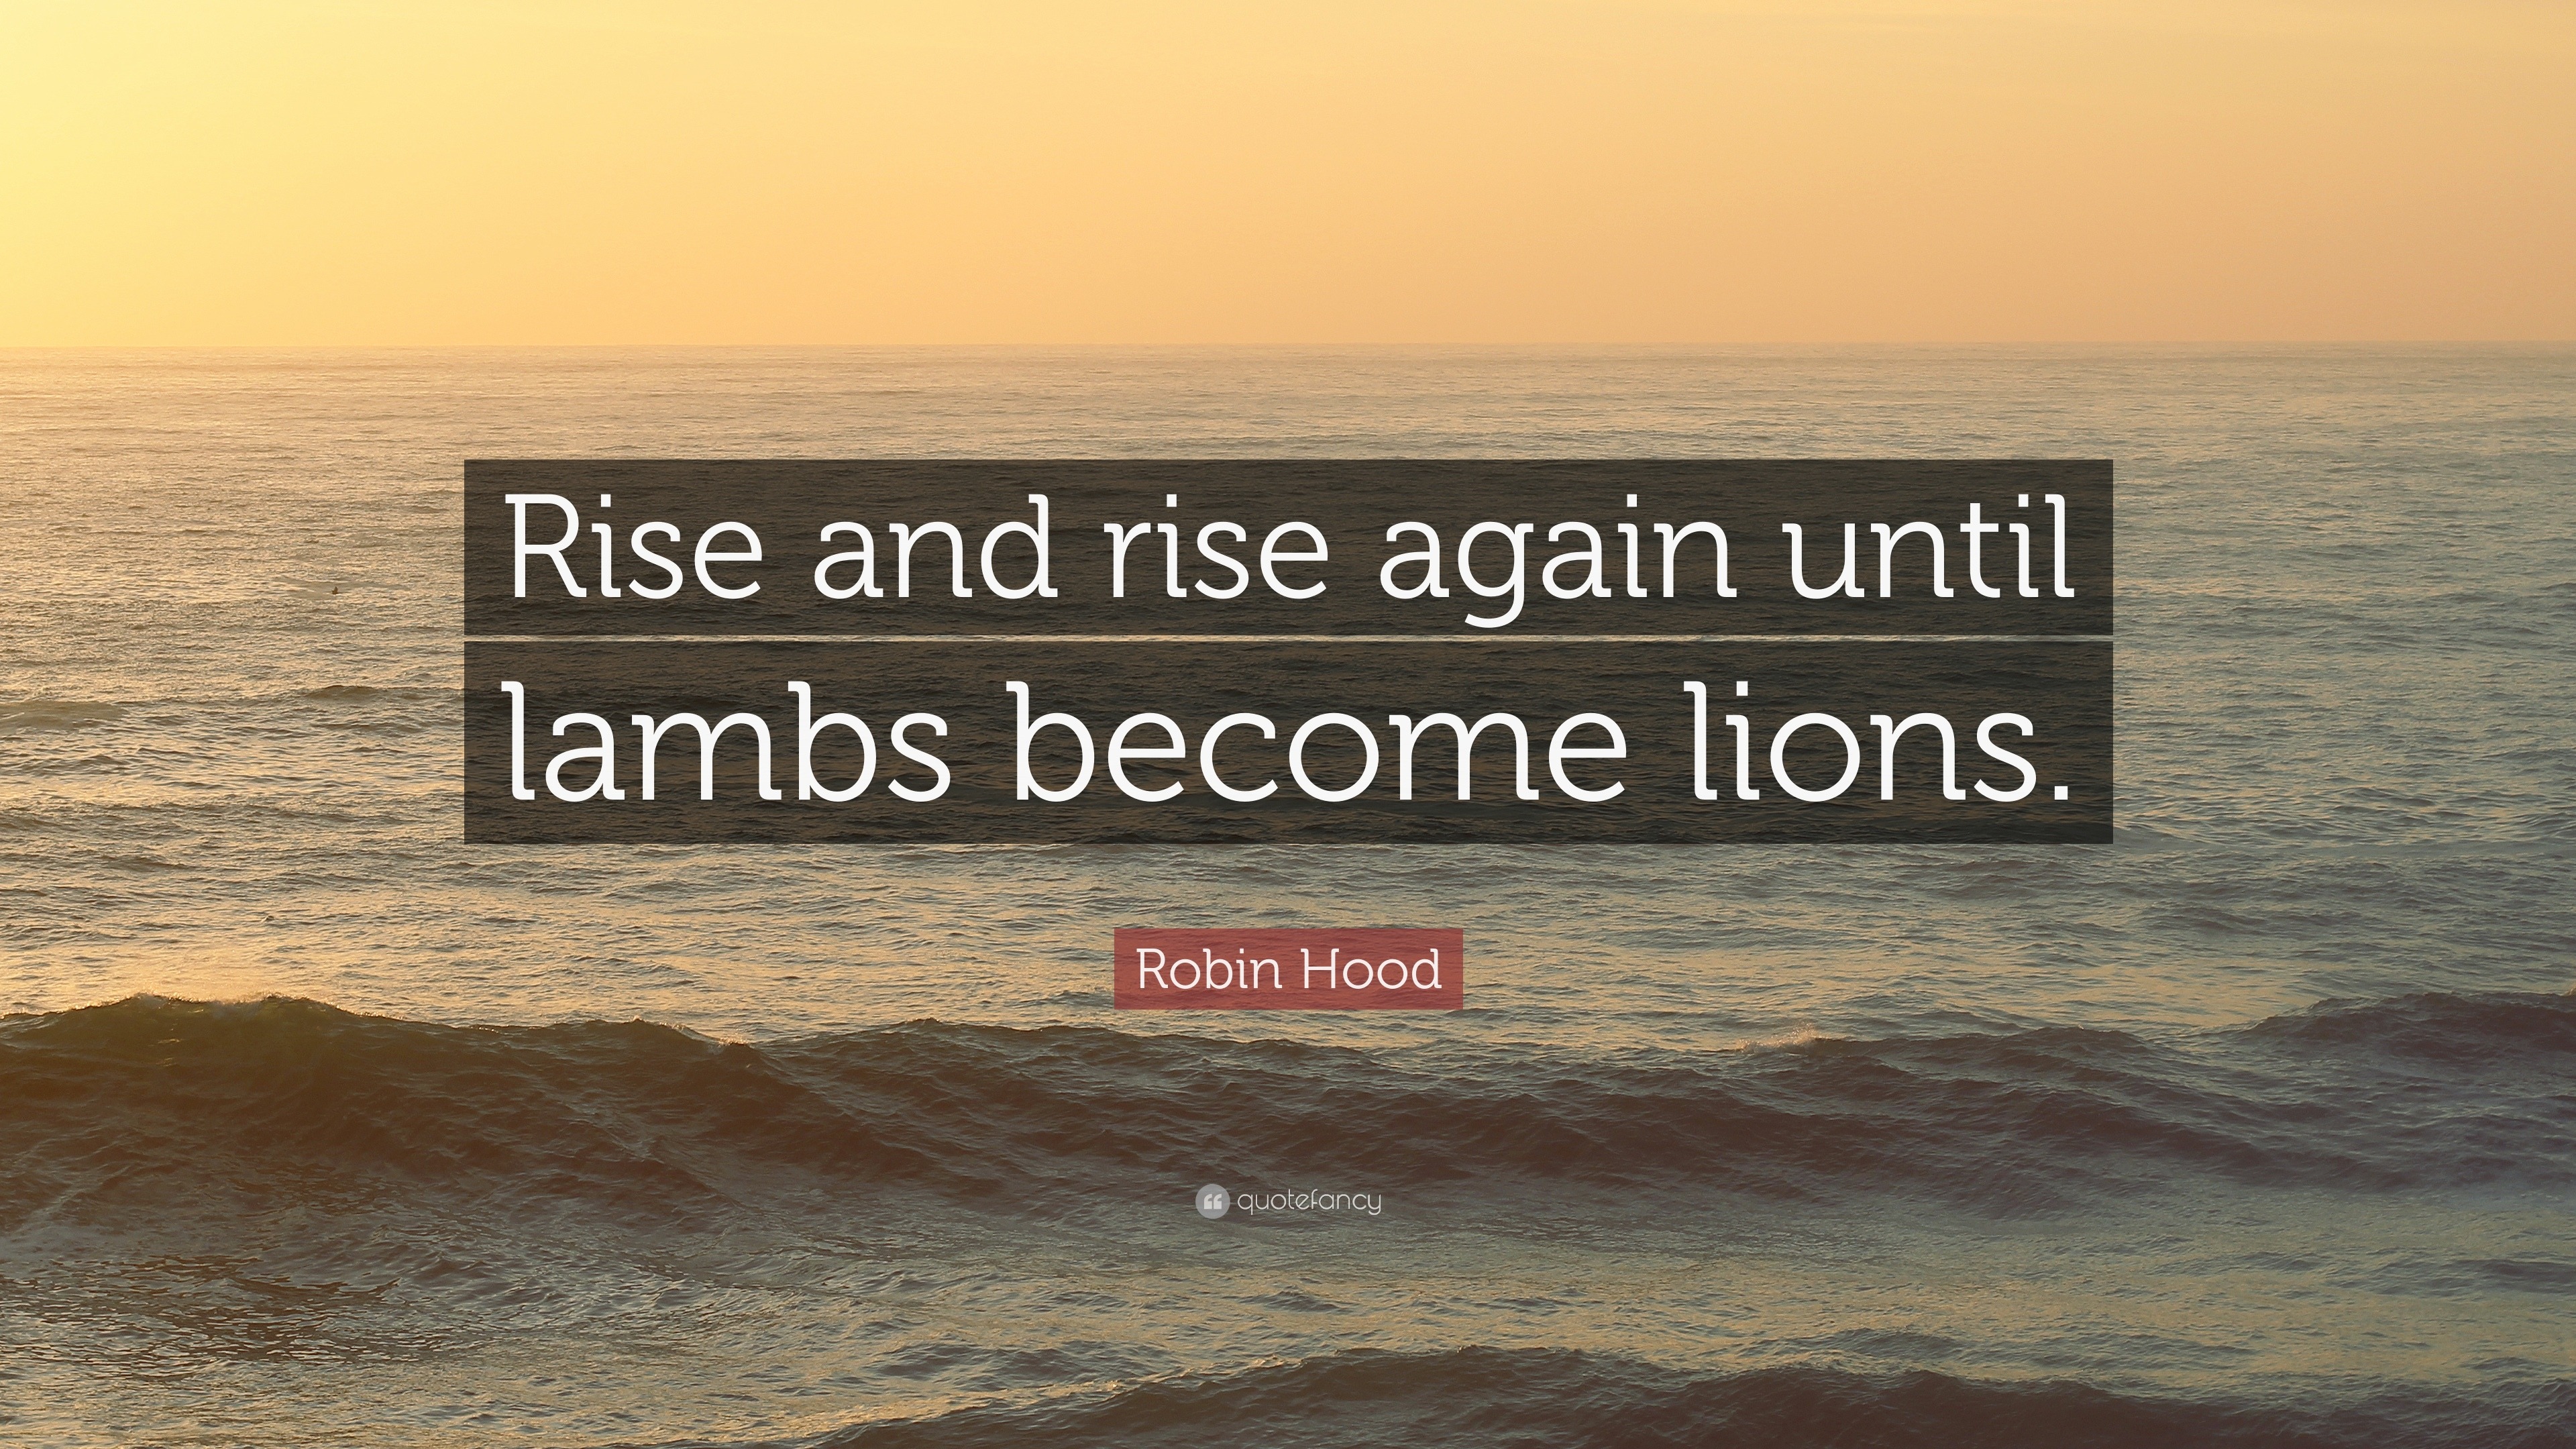 Robin Hood Quote: “Rise and rise again until lambs become lions.” (12